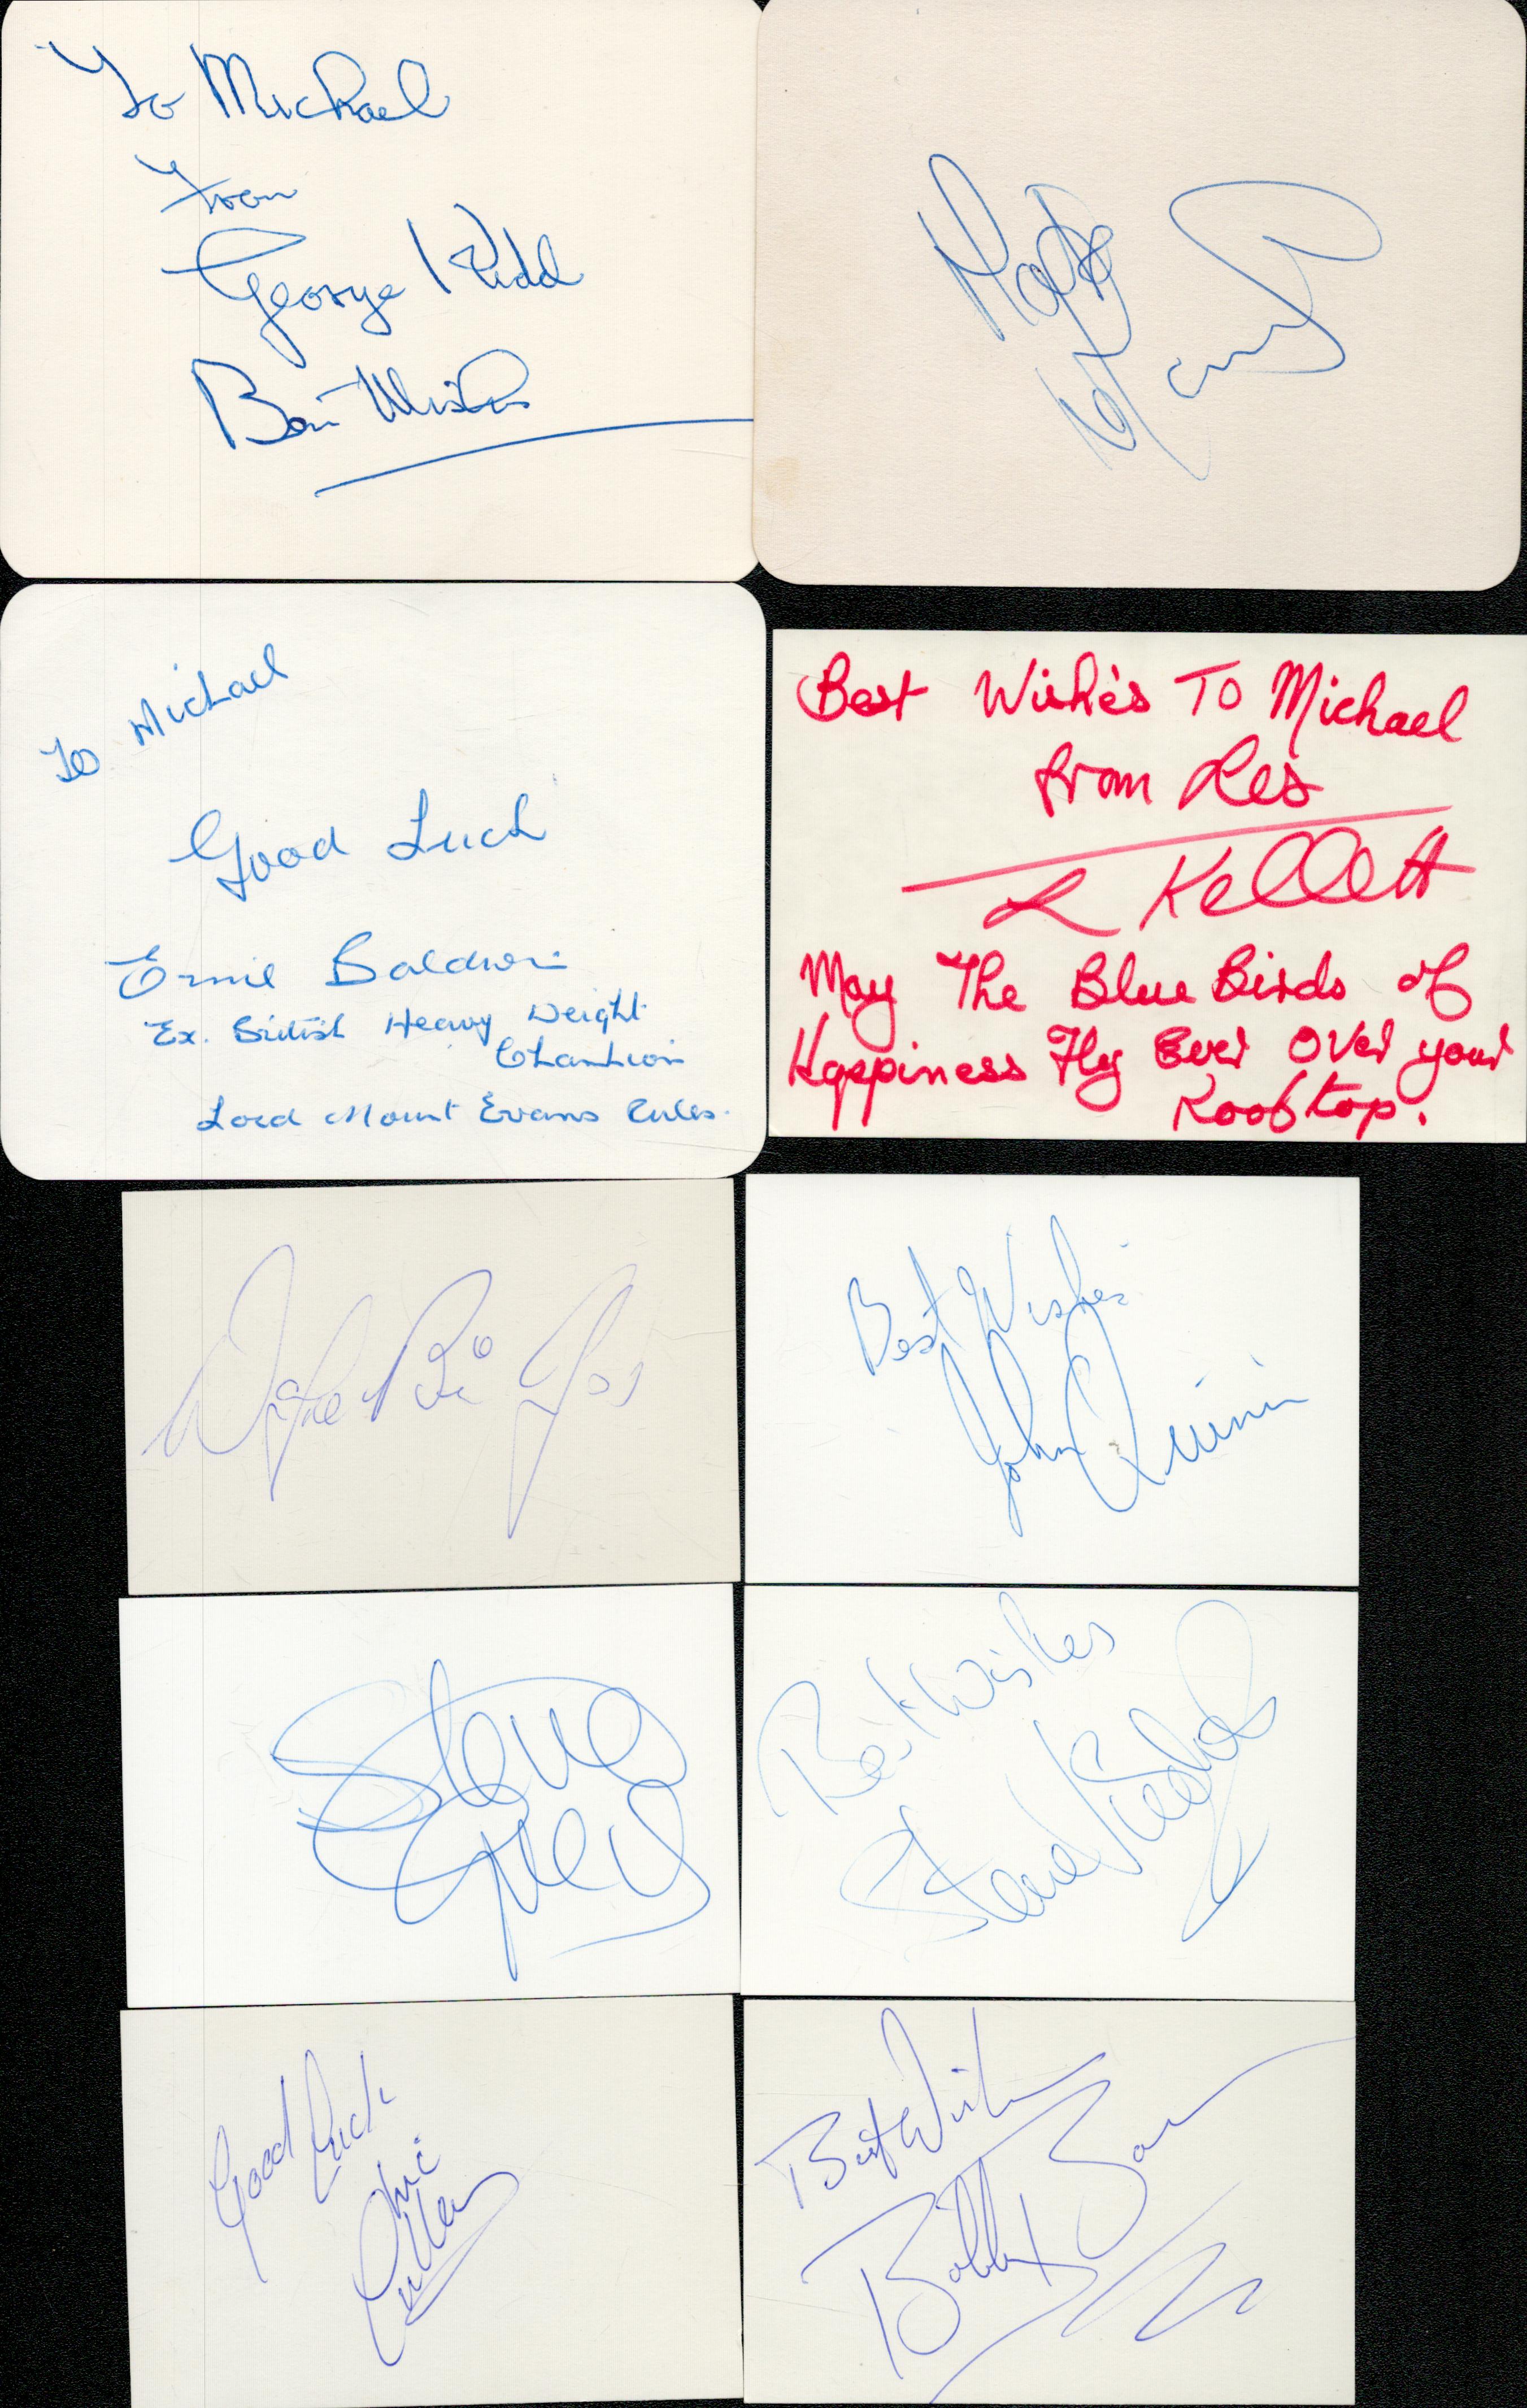 Wrestling - 20 vintage signed cards, 4.5x3.5 inches down to 3.5x2.5 inches, some dedicated. They are